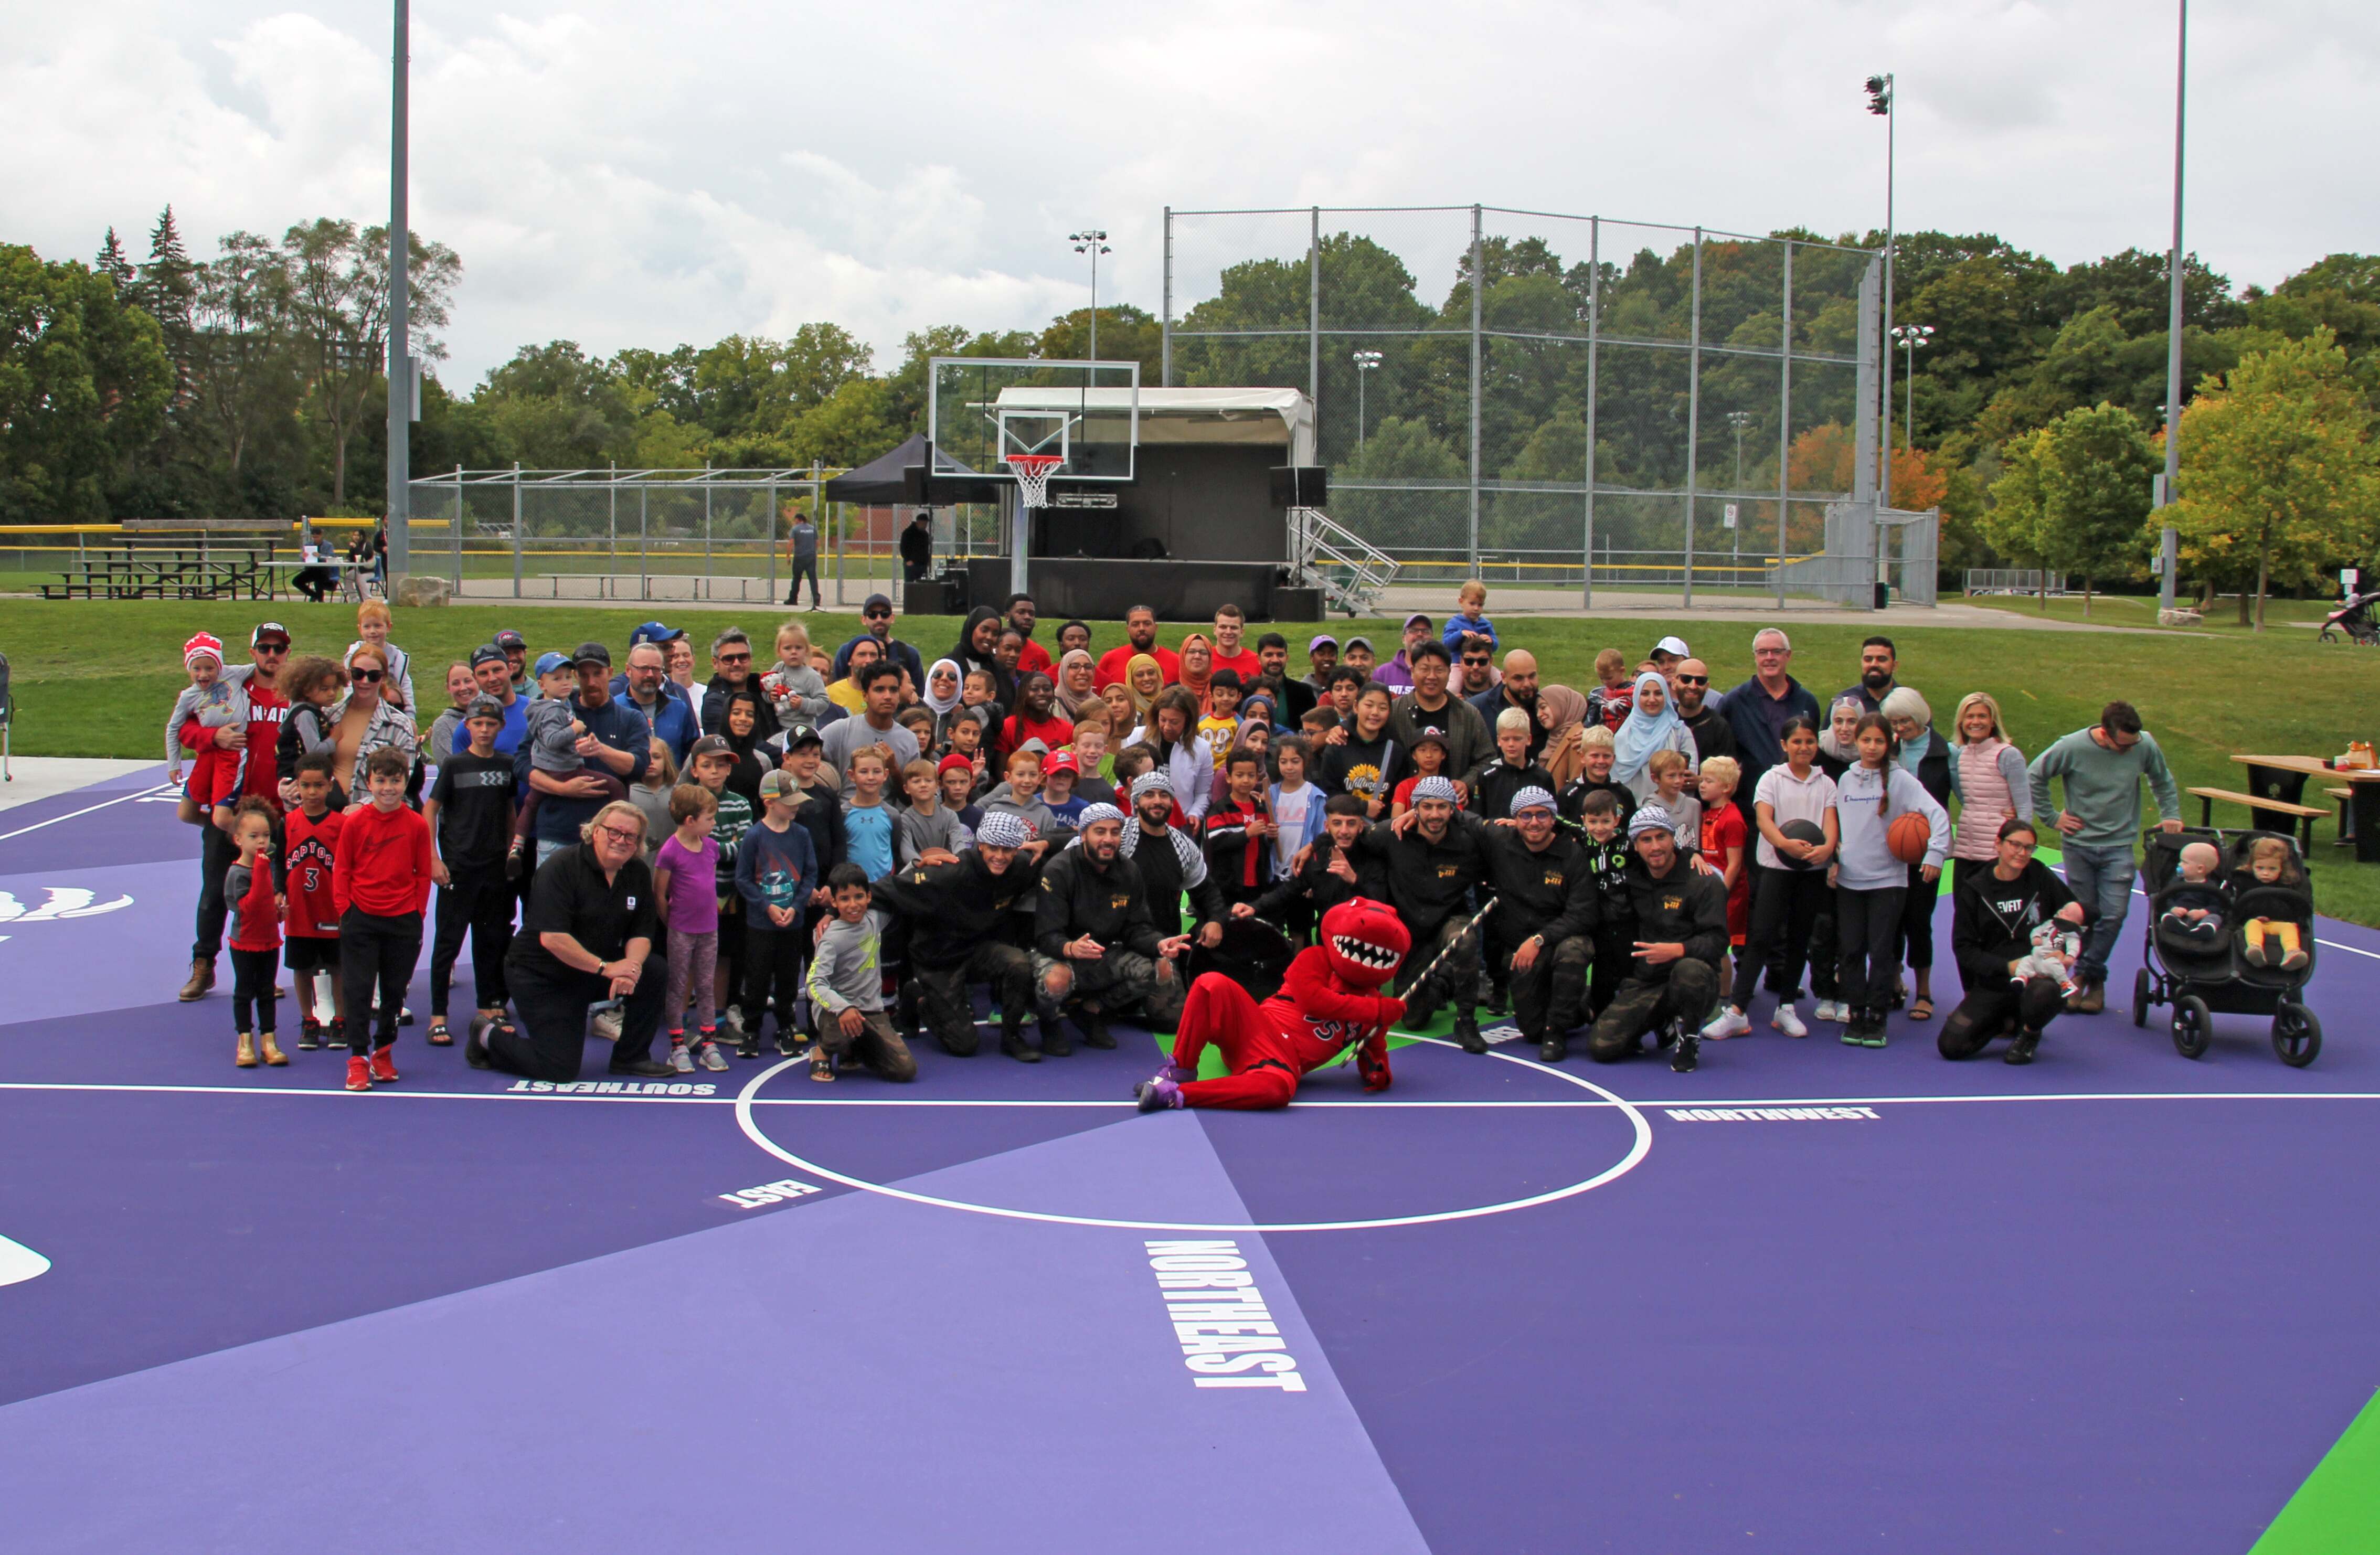 The community poses for a group photo celebrating the reopening of the upgraded basketball courts in West Lions Park